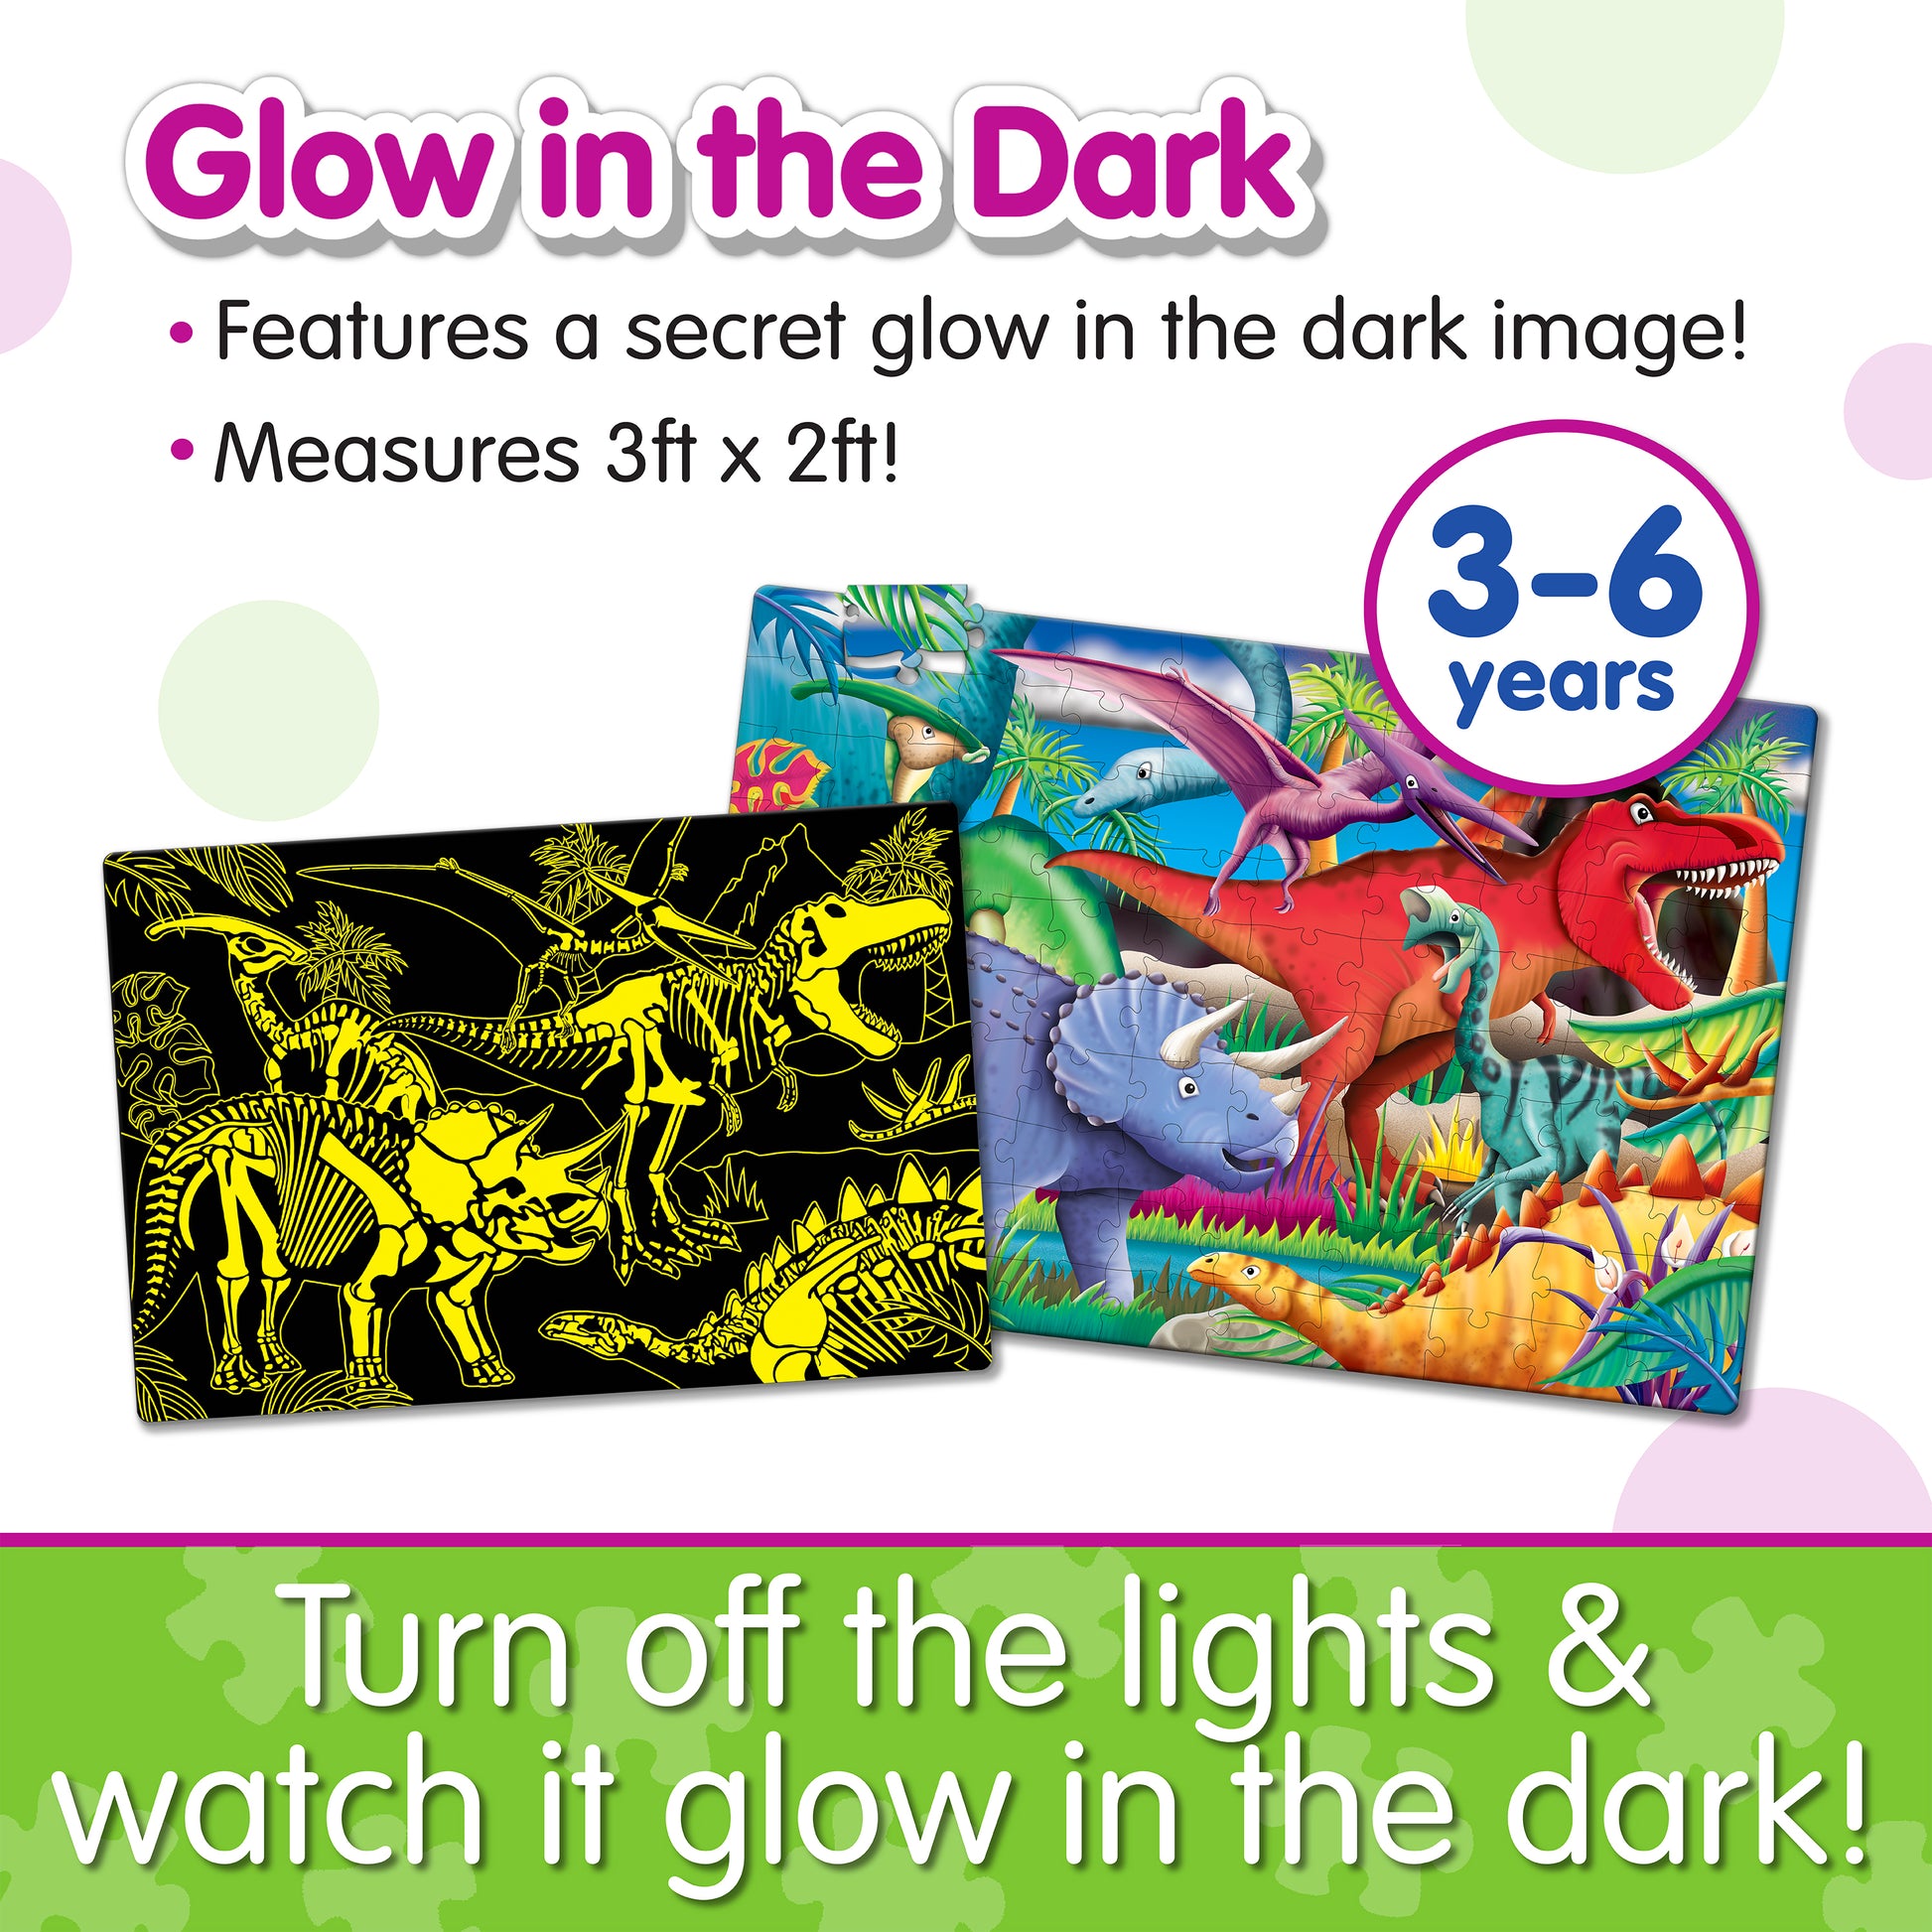 Infographic about Glow in the Dark - Dinos that says, "Turn off the lights and watch it glow in the dark!"